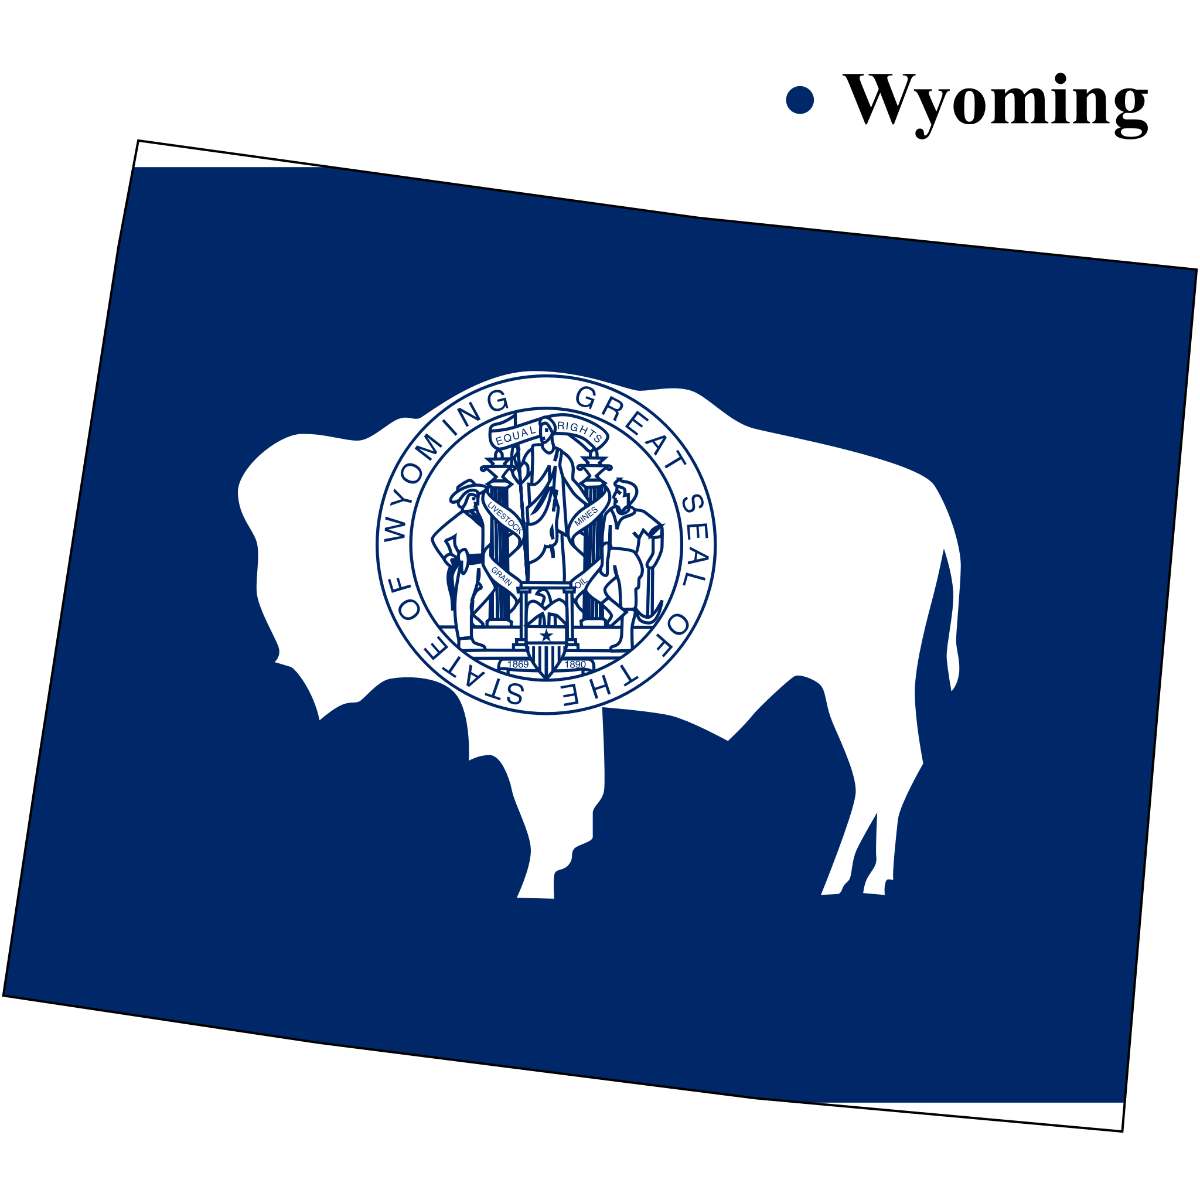 Wyoming State map cutout with Wyoming flag superimposed